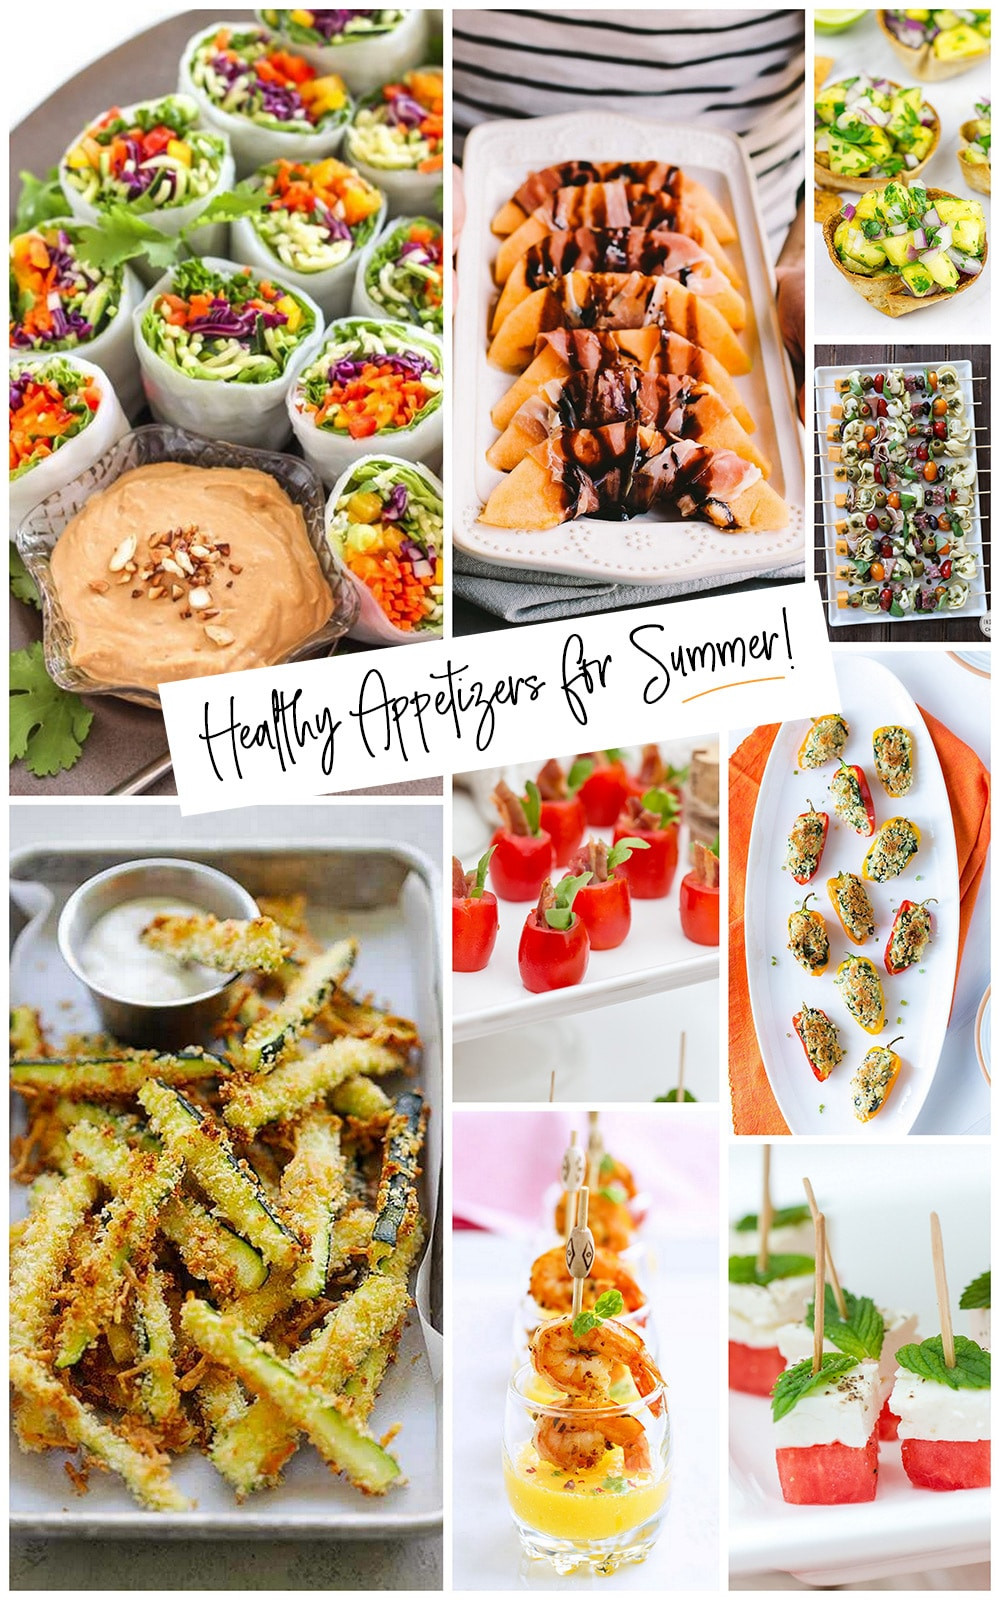 Simple Healthy Appetizers
 Healthy Summer Appetizers Easy & Delish Pizzazzerie